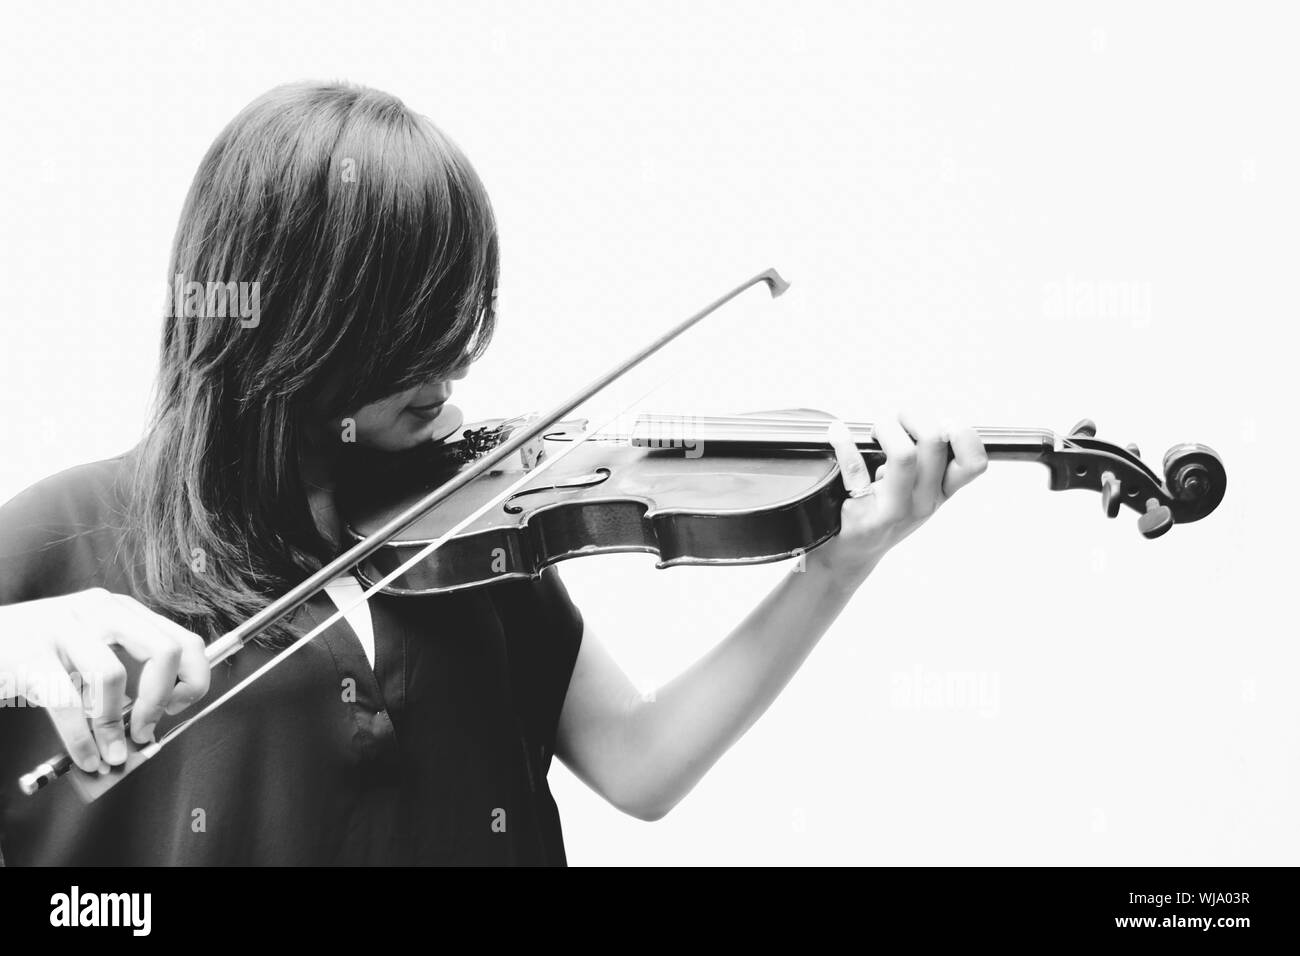 Female Violinist Playing Violin Against White Background Stock Photo